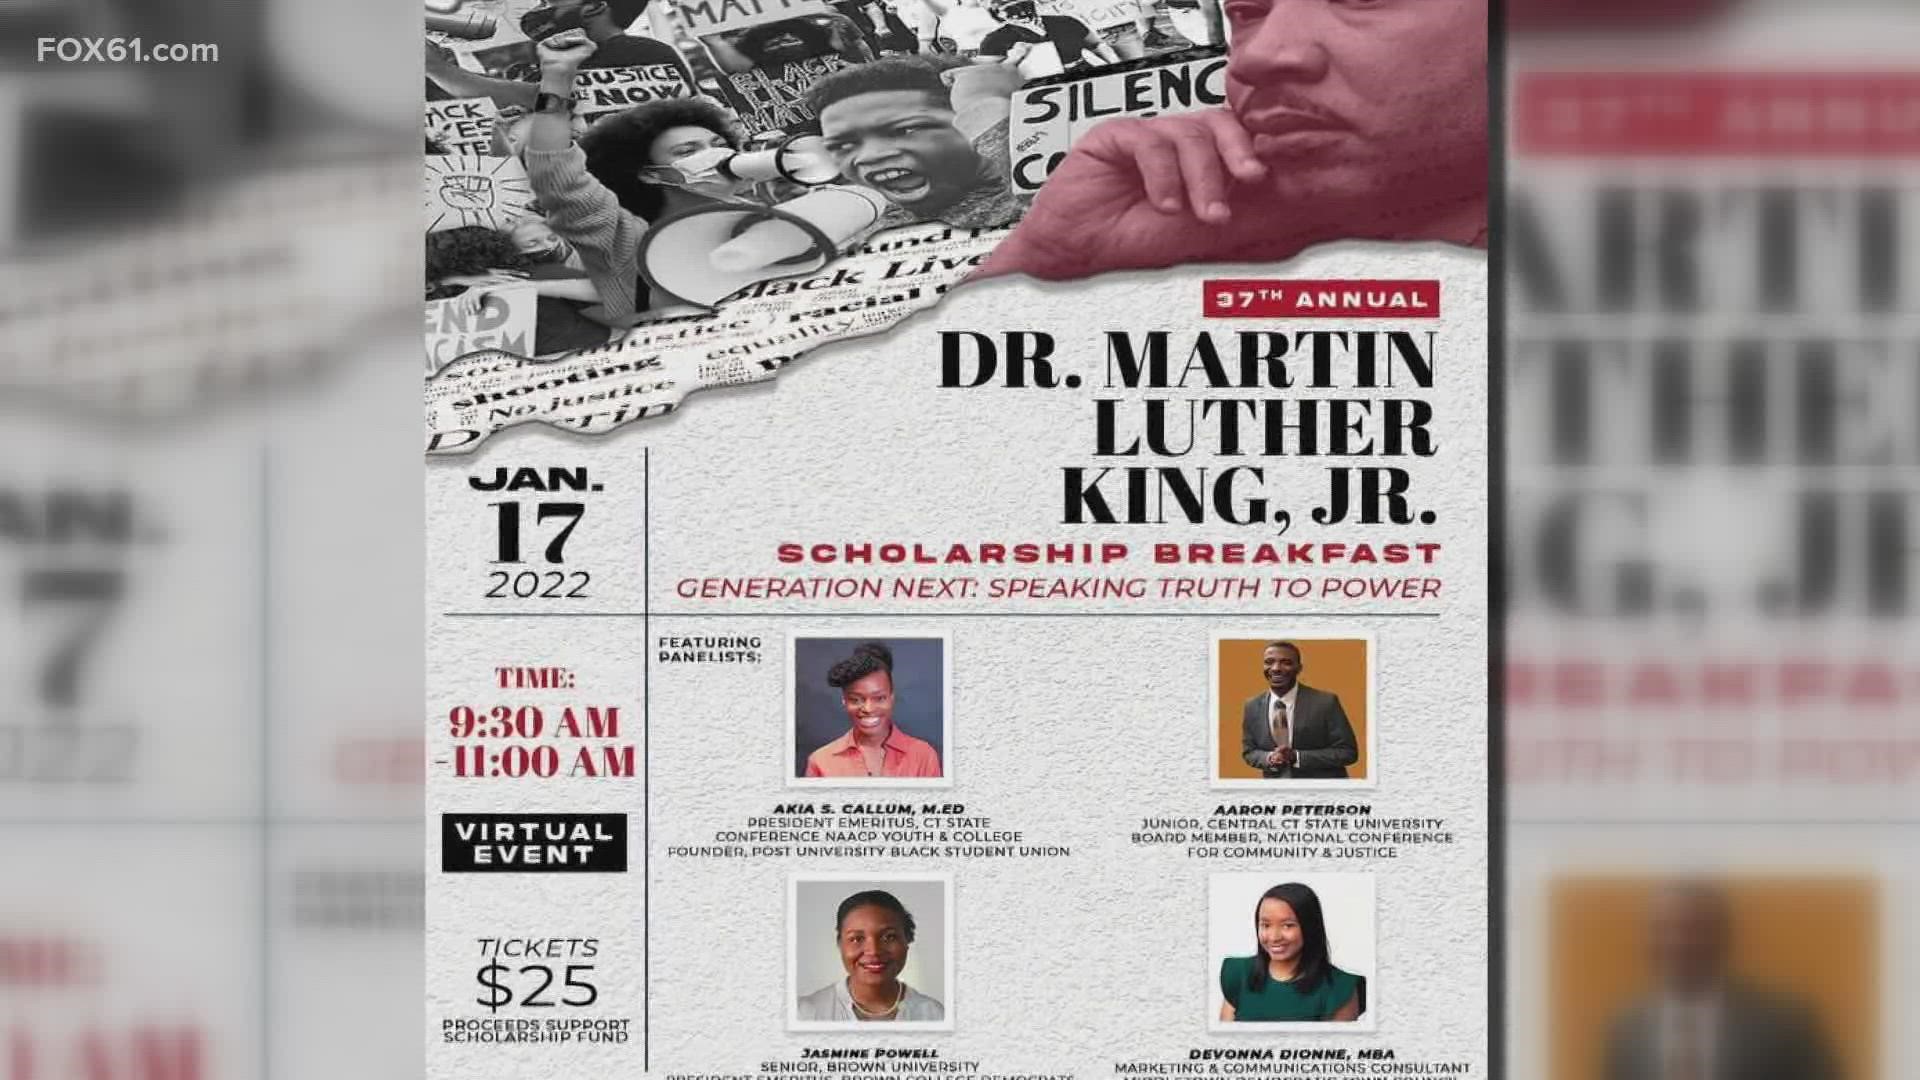 The Hartford Alumnae Chapter of Delta Sigma Theta Sorority incorporated hosted its 37th annual Dr. Martin Luther King, Jr. Scholarship Breakfast Monday morning.